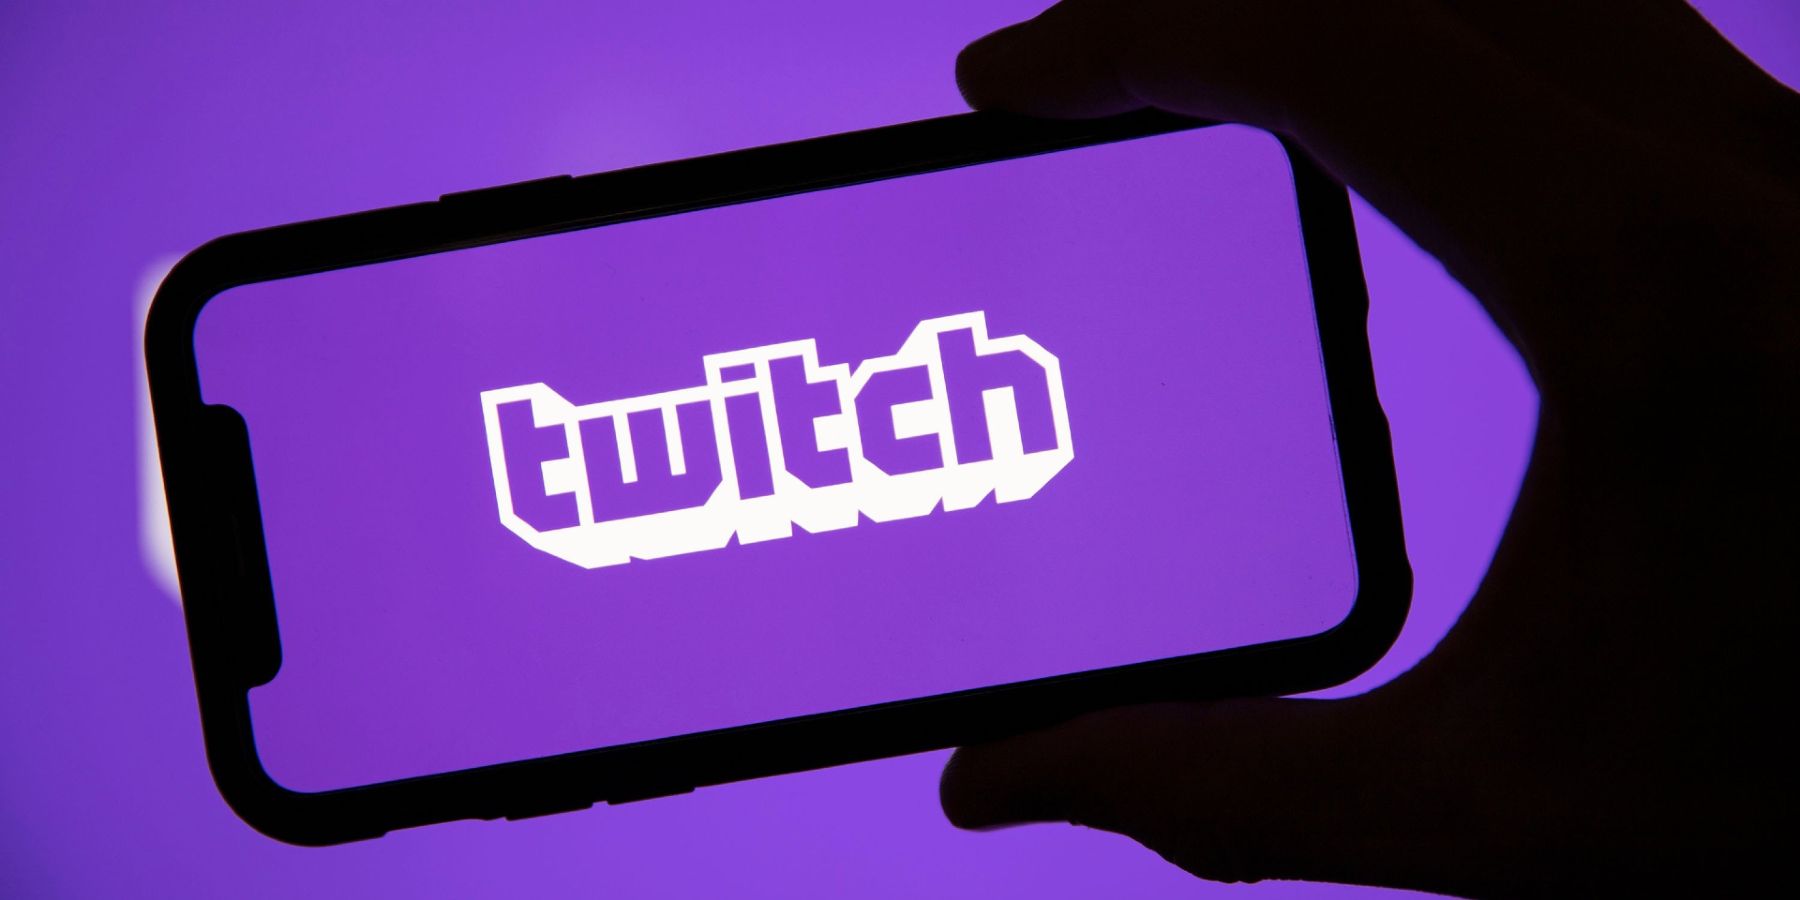 A phone being held up which shows the Twitch logo on the screen, all on a purple background.